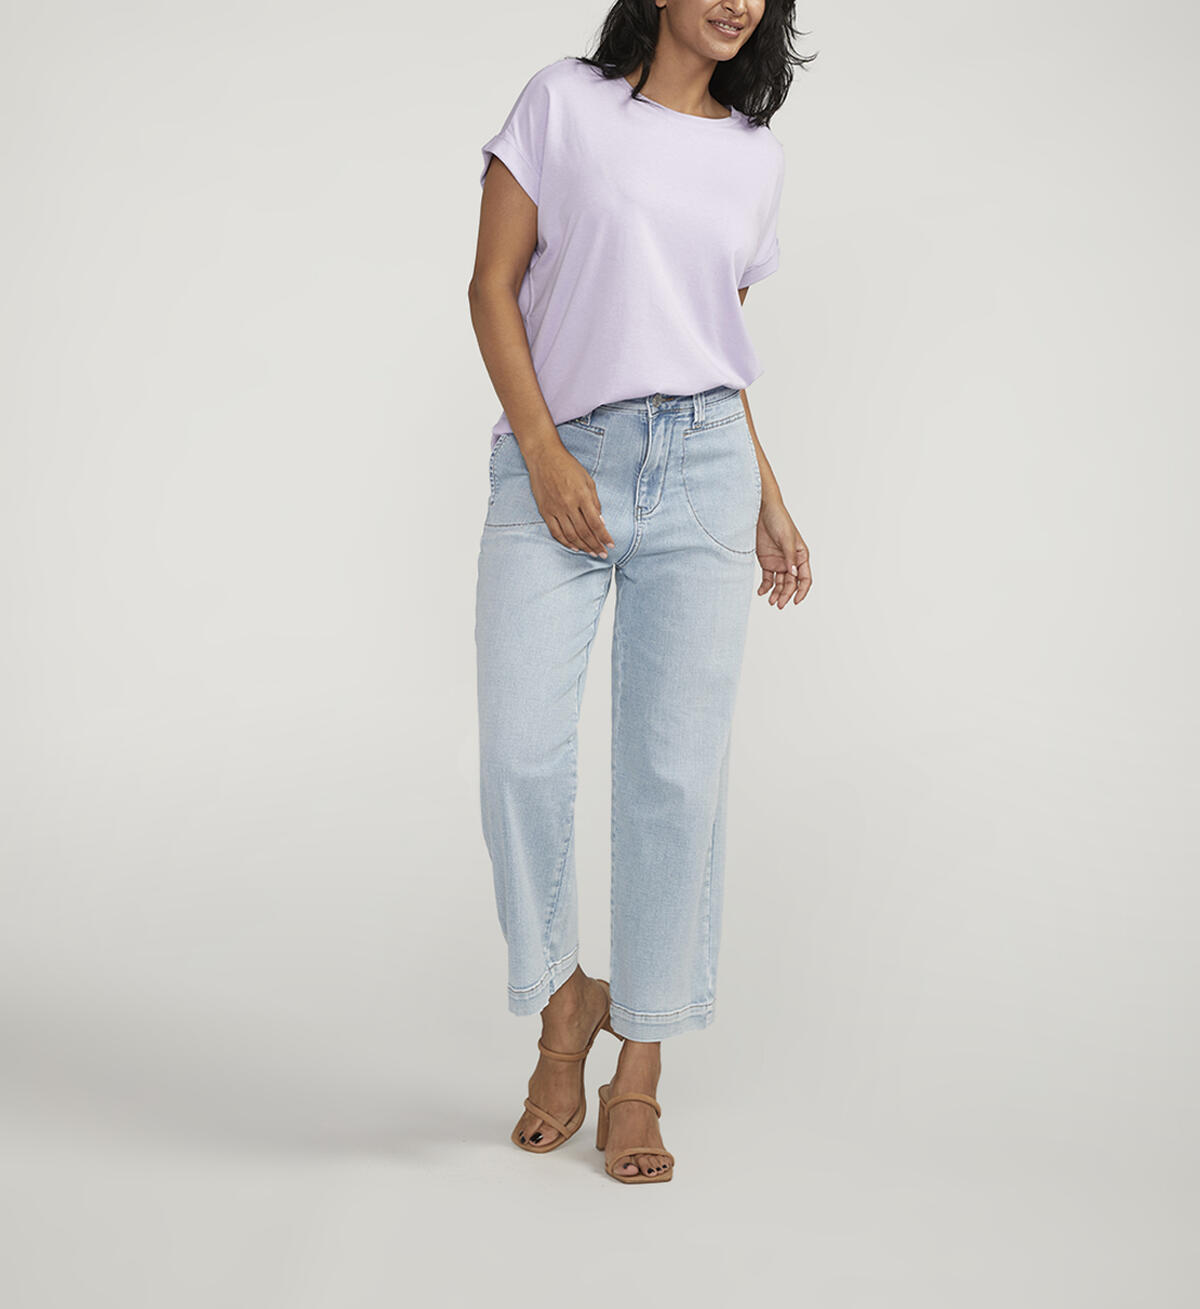 Drapey Luxe Tee, Lavender, hi-res image number 2